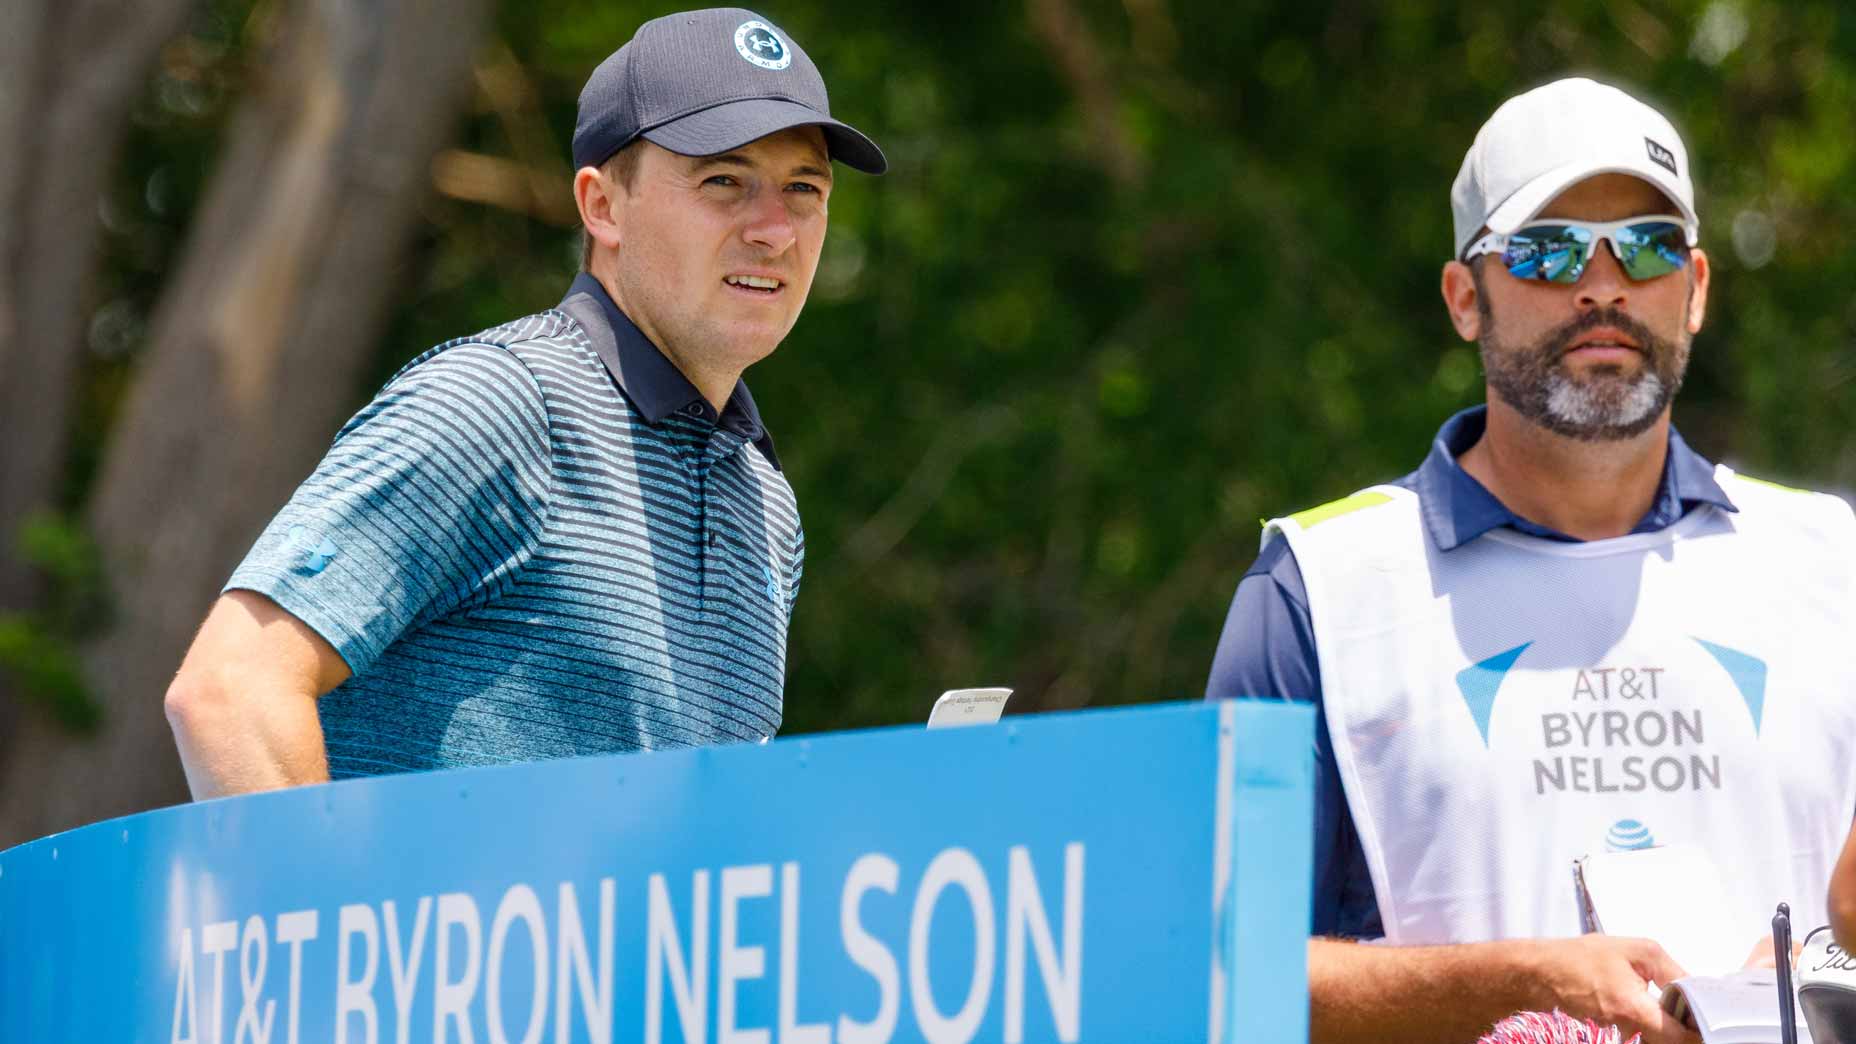 Jordan Spieth and caddie Michael Greller stand on tee box at 2021 AT&T Byron Nelson